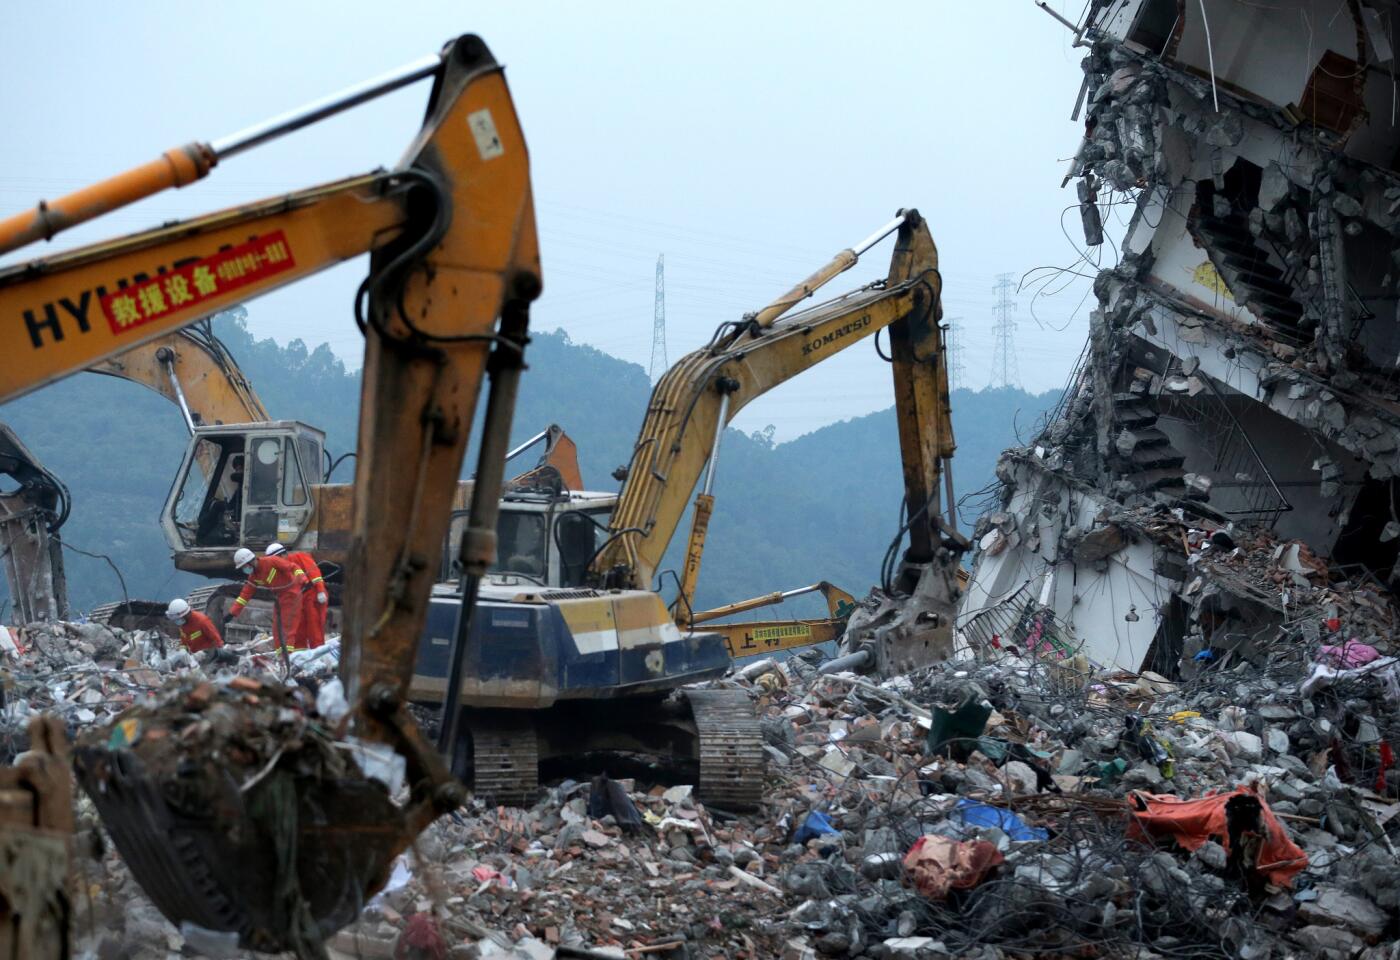 Rescuers search for potential survivors on Dec. 22, 2015, near a damaged buildings after a landslide at an industrial park in Shenzhen, China.